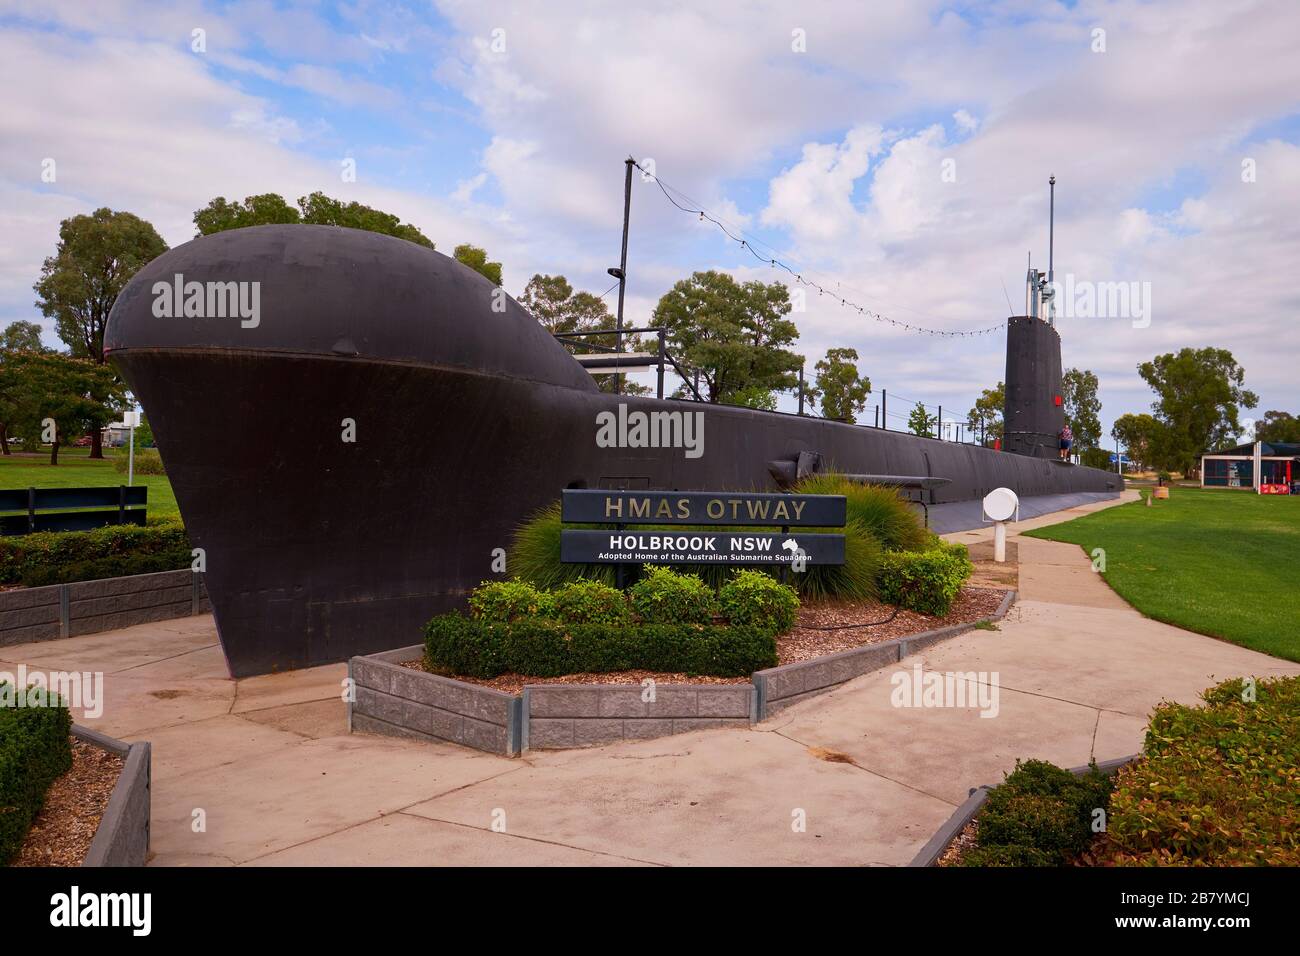 The actual HMAS Otway submarine, half buried. At the Commander Holbrook park in Hollbrook, NSW, Australia. Stock Photo